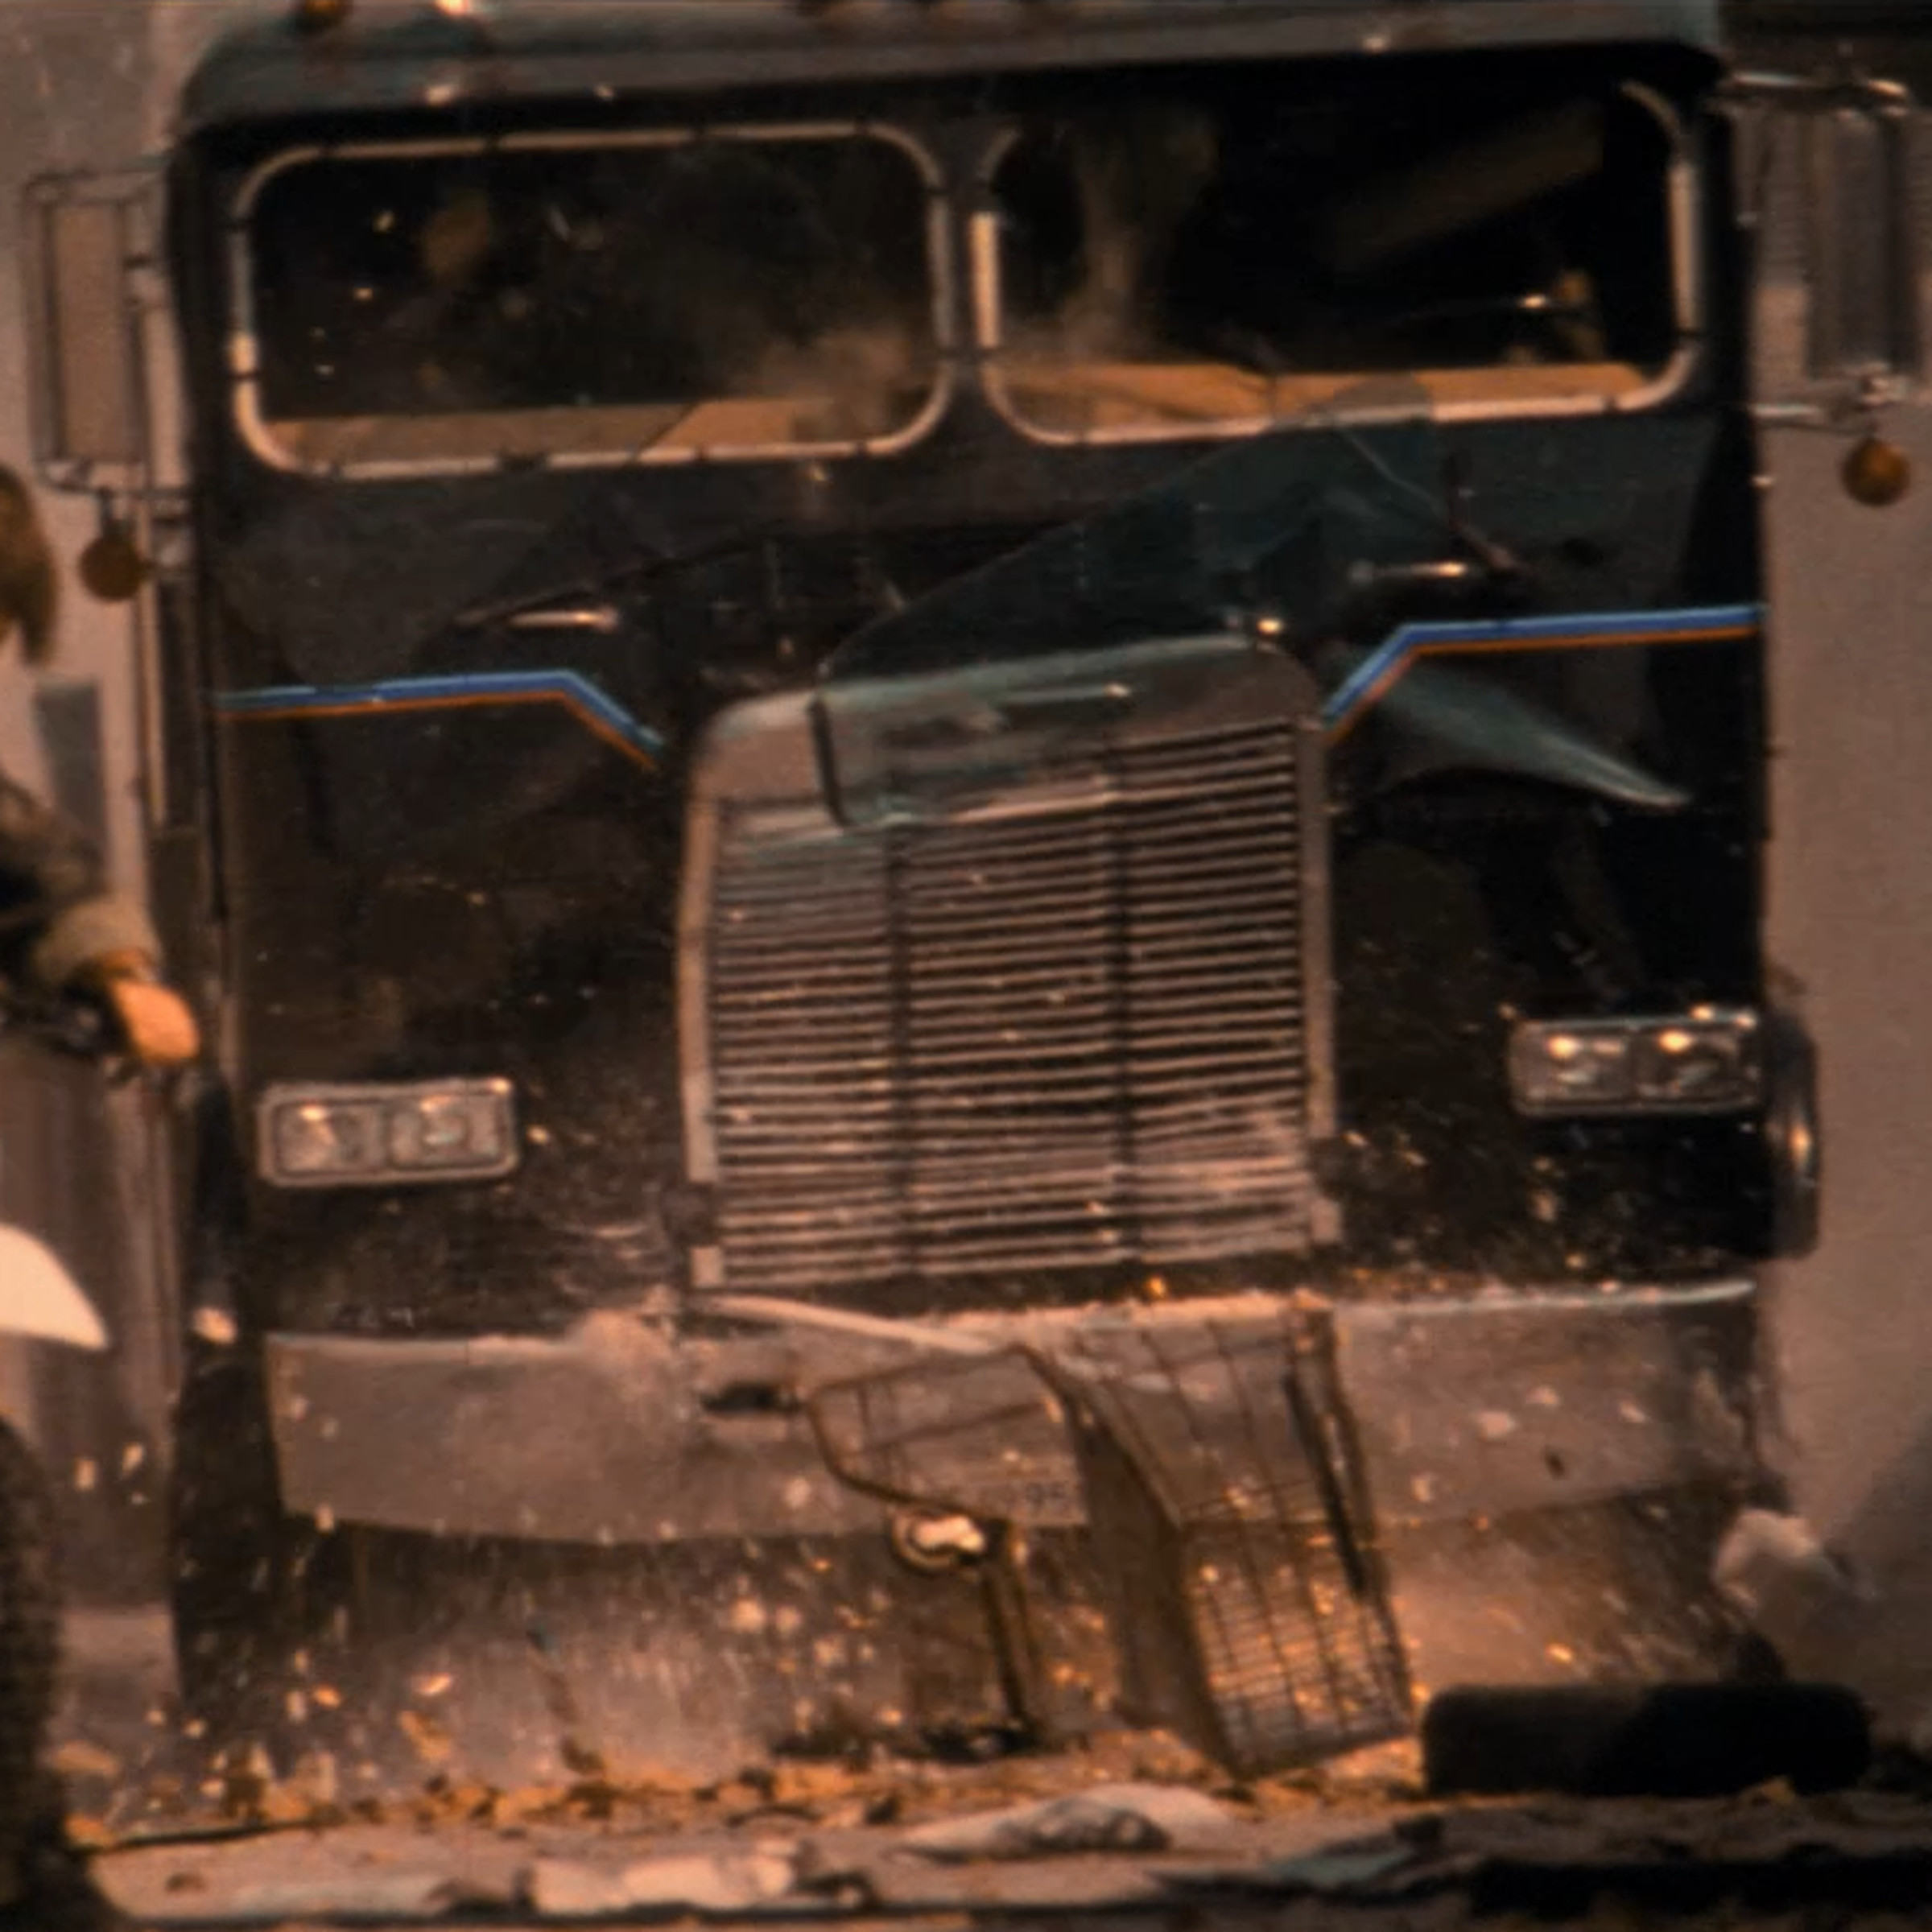 A screenshot from Terminator 2 showing a person on a dirtbike in the foreground and a flat-nosed semi truck in the background, approaching him.